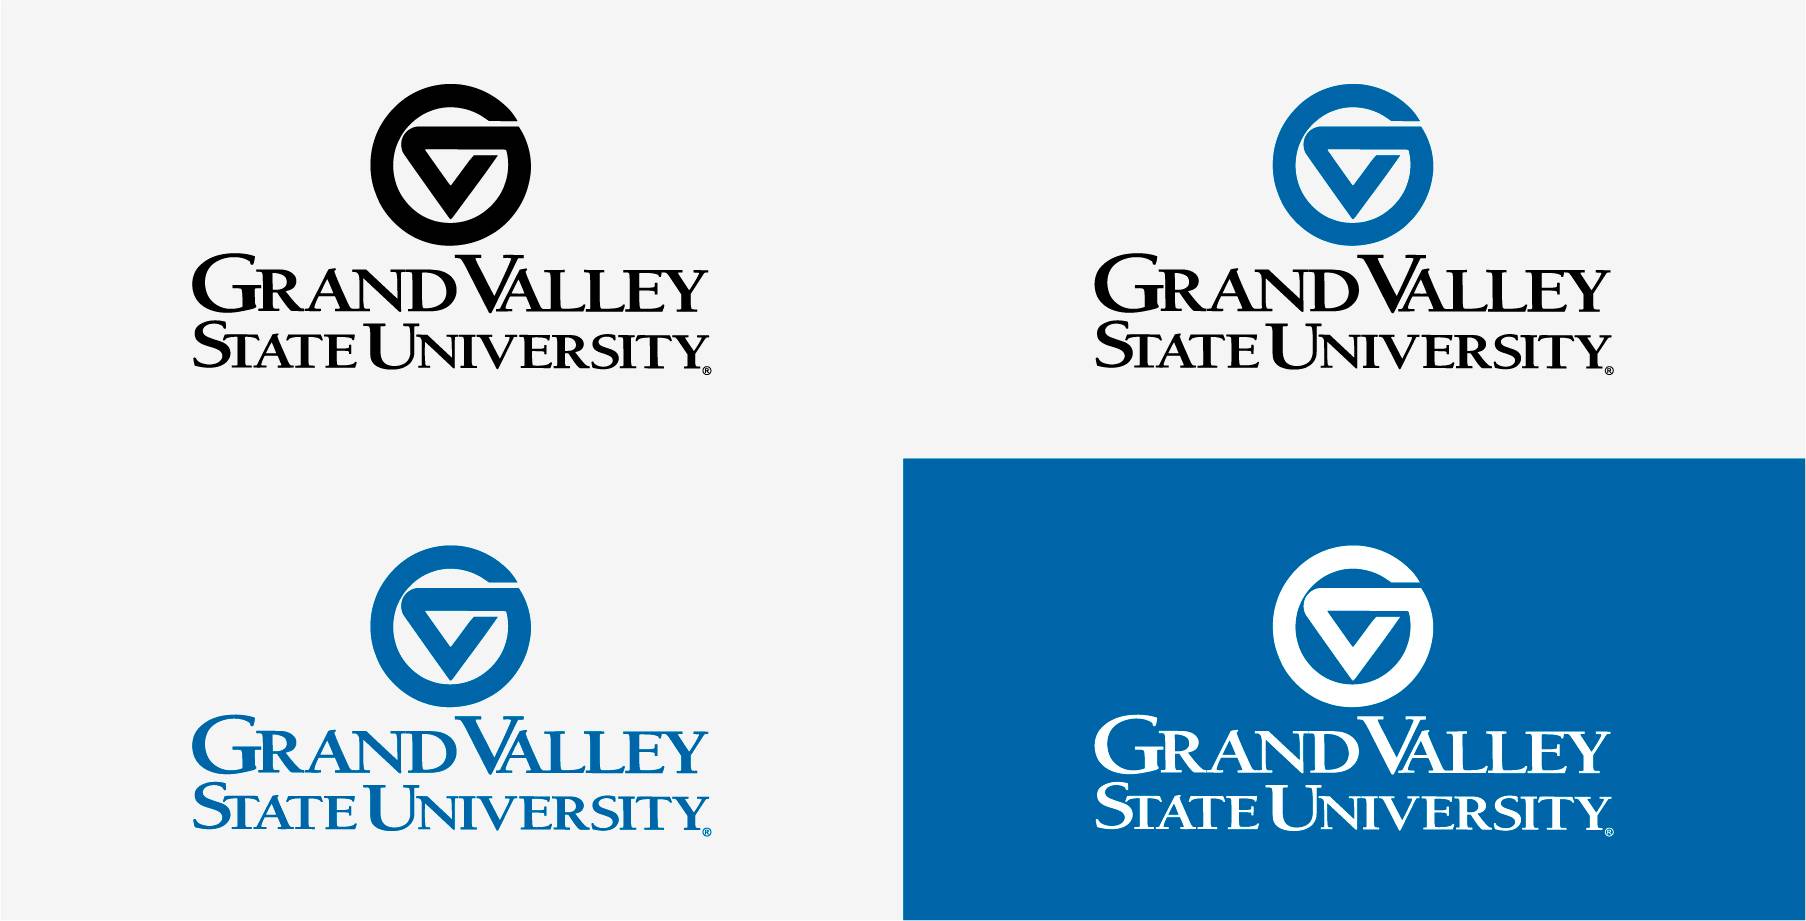 4 marktop Grand Valley logos: one black, one Grand Valley blue, one 2-color, and one white.